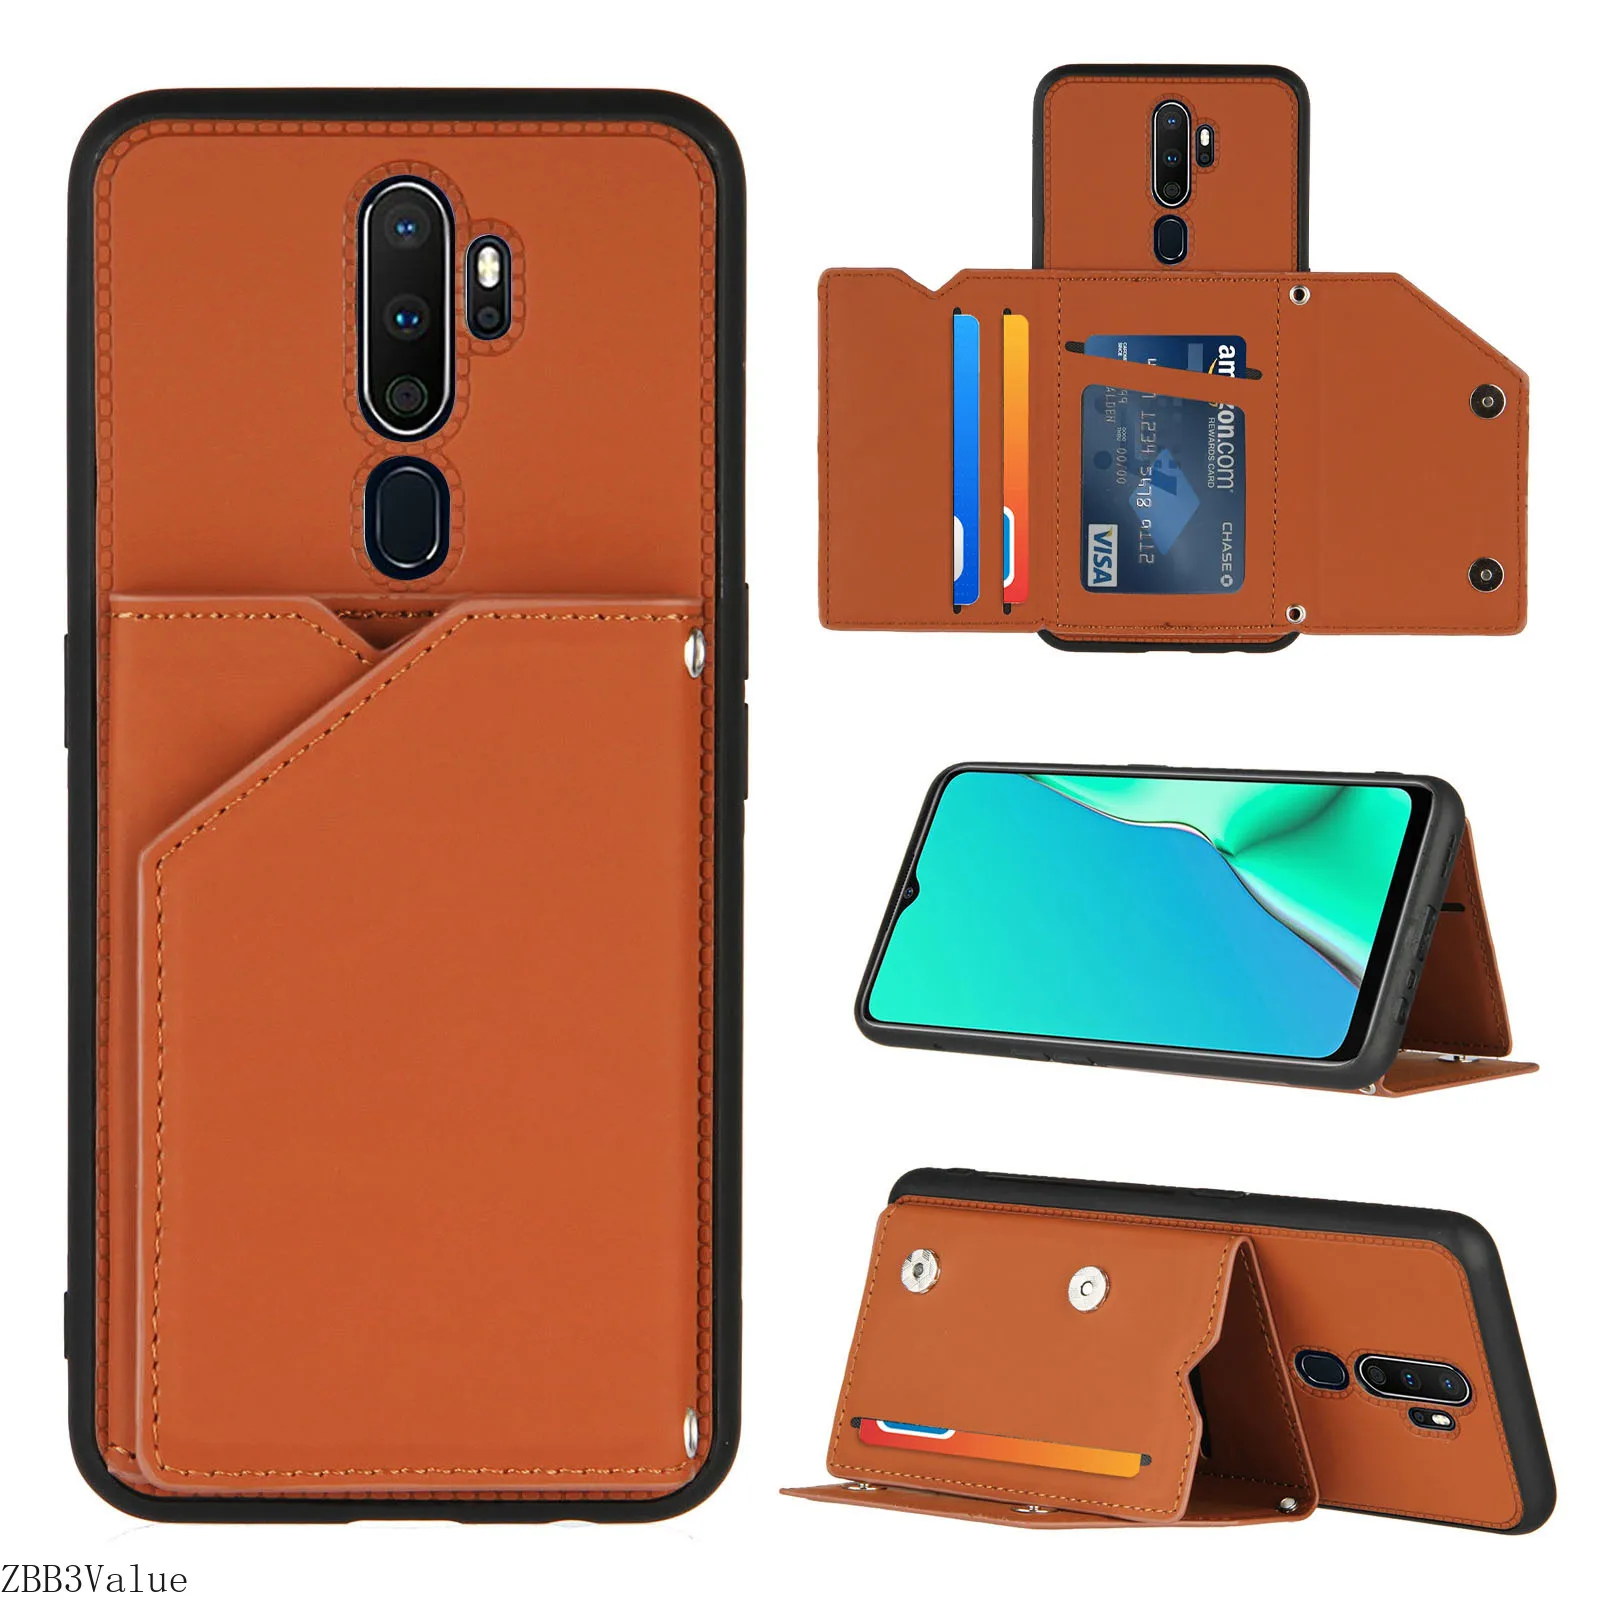 Skin Feeling PU Leather Card Slots Stand Shockproof Phone Case for OPPO Realme 7 7i C3 C11 C15 A9 2020 F17 Pro A7 A5S Back Case